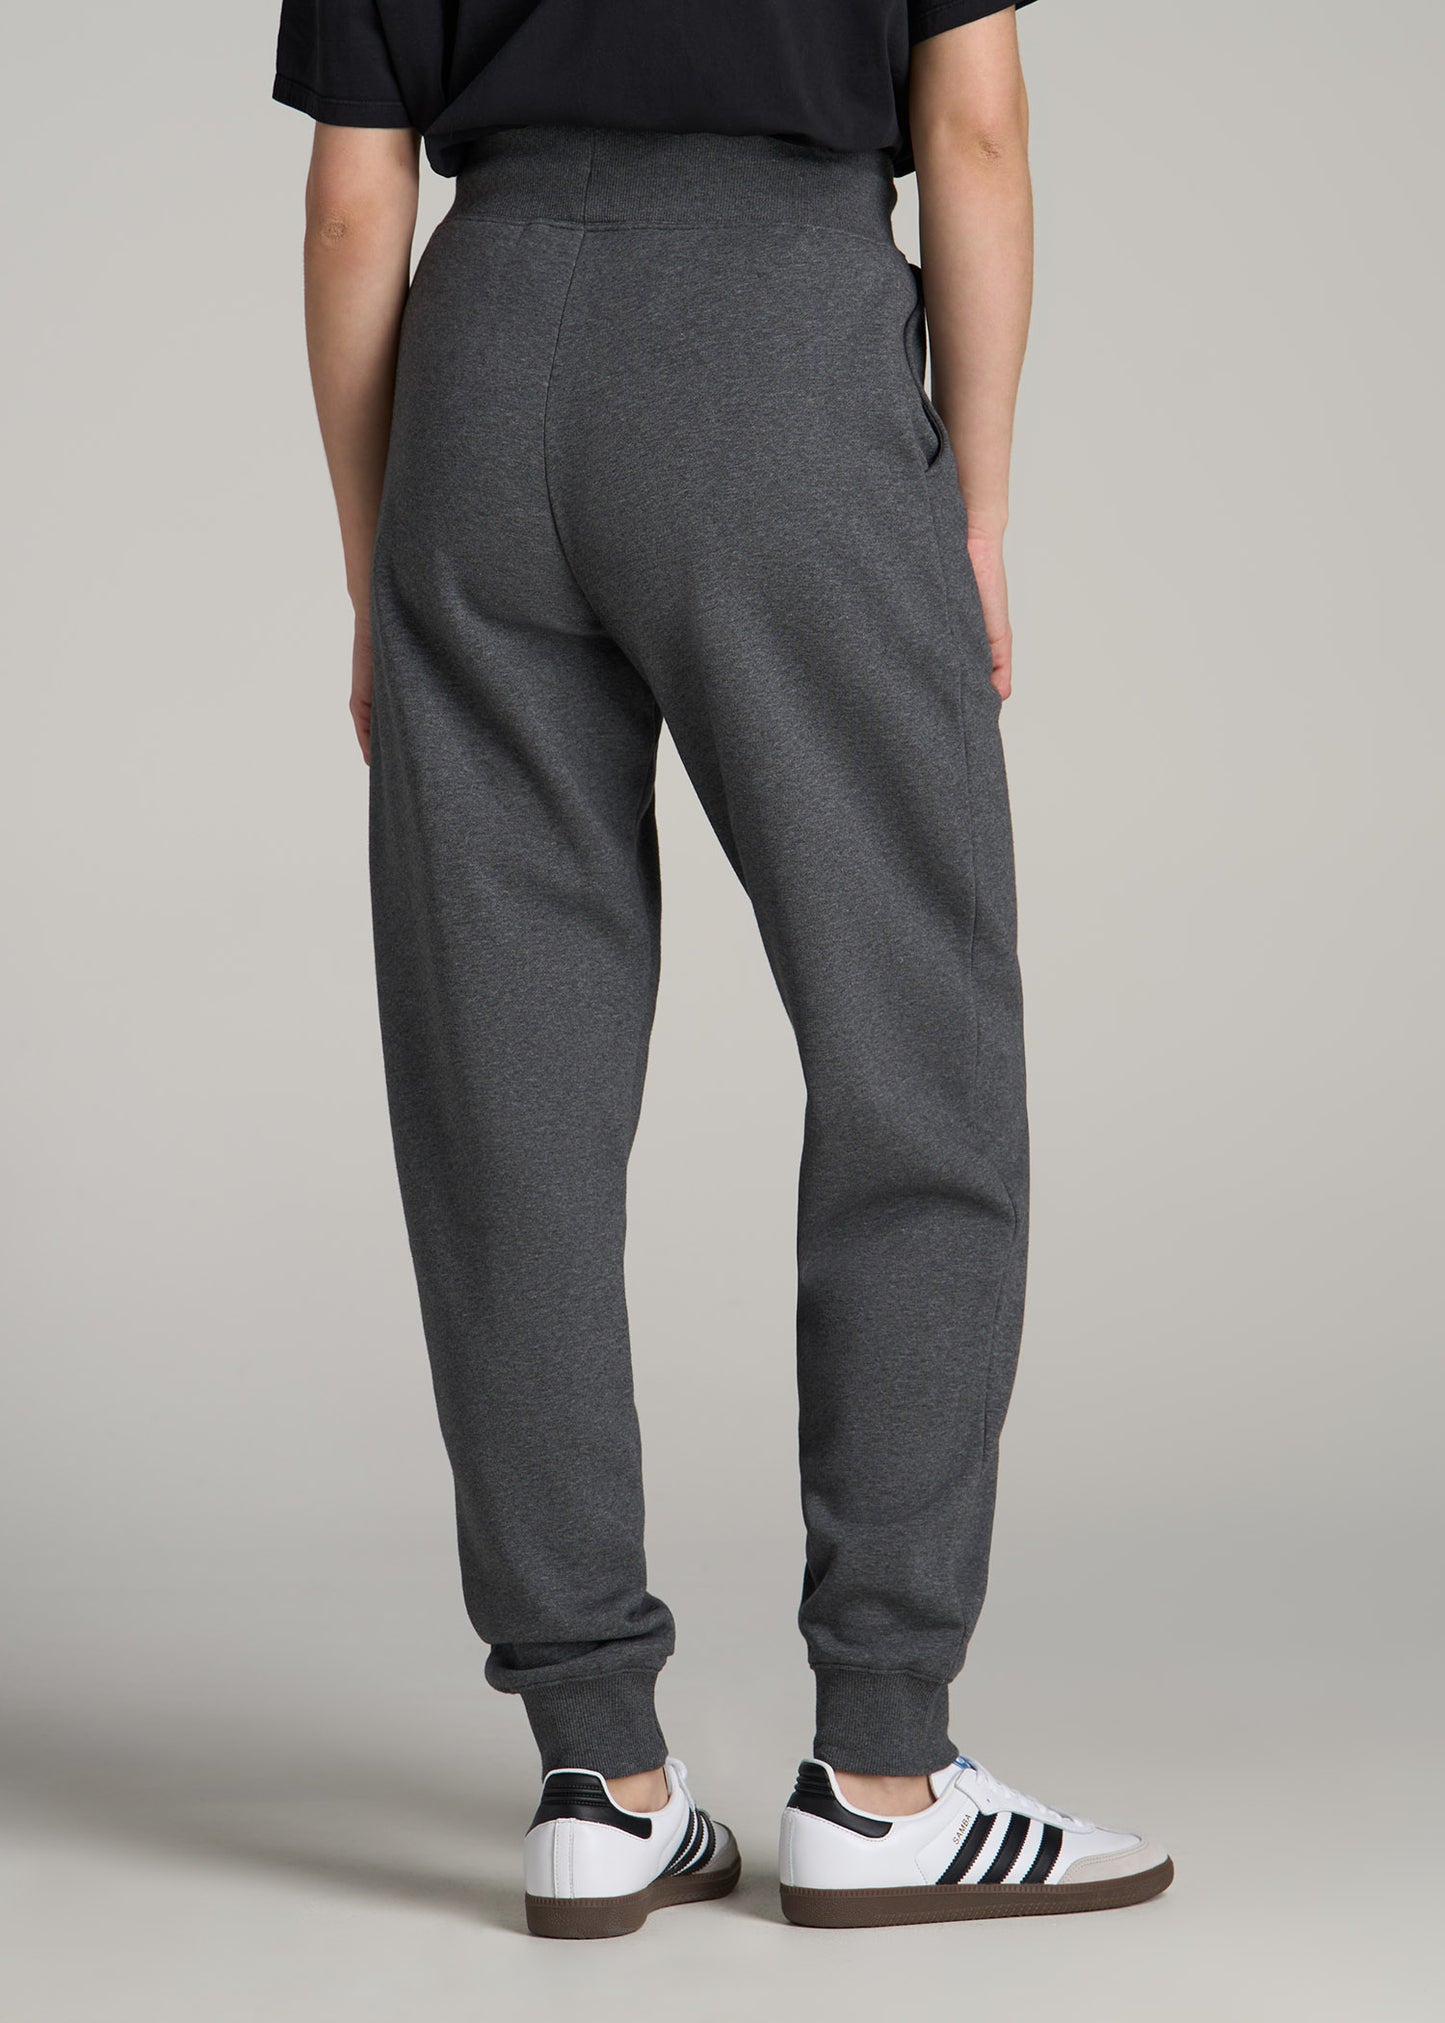 A.T. Basics Athletic Joggers for Tall Women in Charcoal Mix